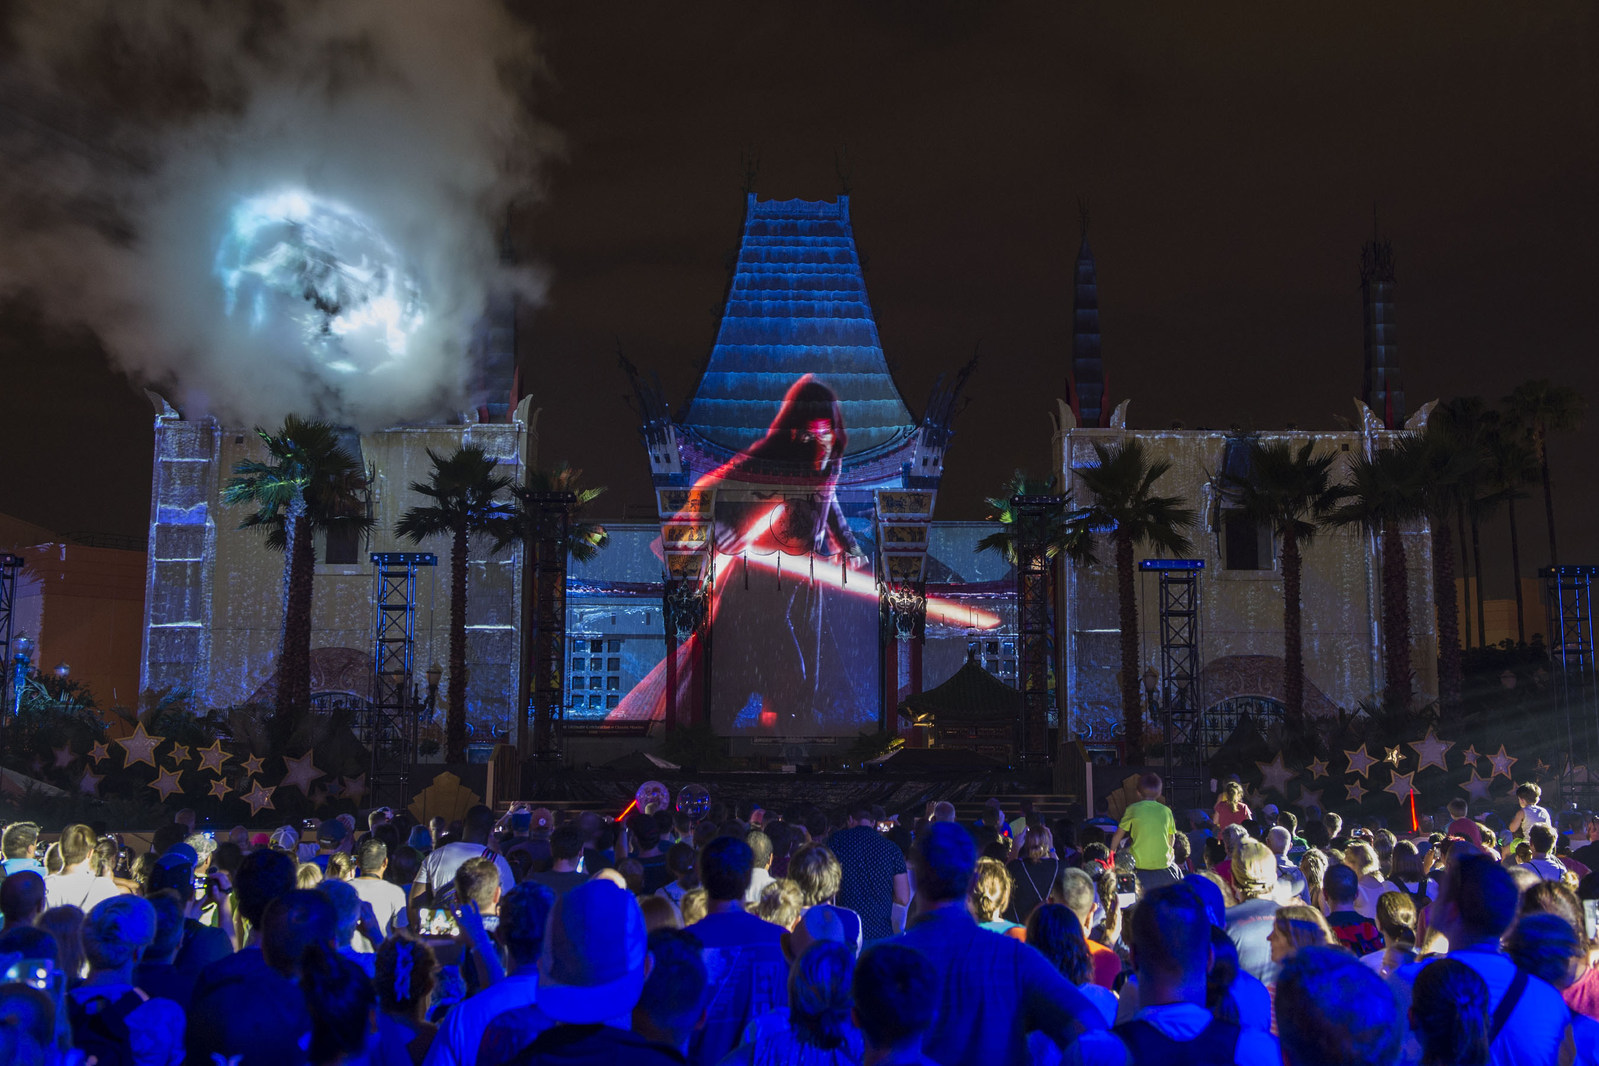 Star Wars: Galactic Nights, a special event at Disney's Hollywood Studios, returns Dec. 16, 2017 for one evening only with out-of-this-world entertainment, character encounters and more. Guests will be treated Hollywood-style to a red carpet arrival, iconic attractions with little to no wait time, amazing fireworks and projections, and experts sharing details about the Star Wars expansion coming to Disney's Hollywood Studios.